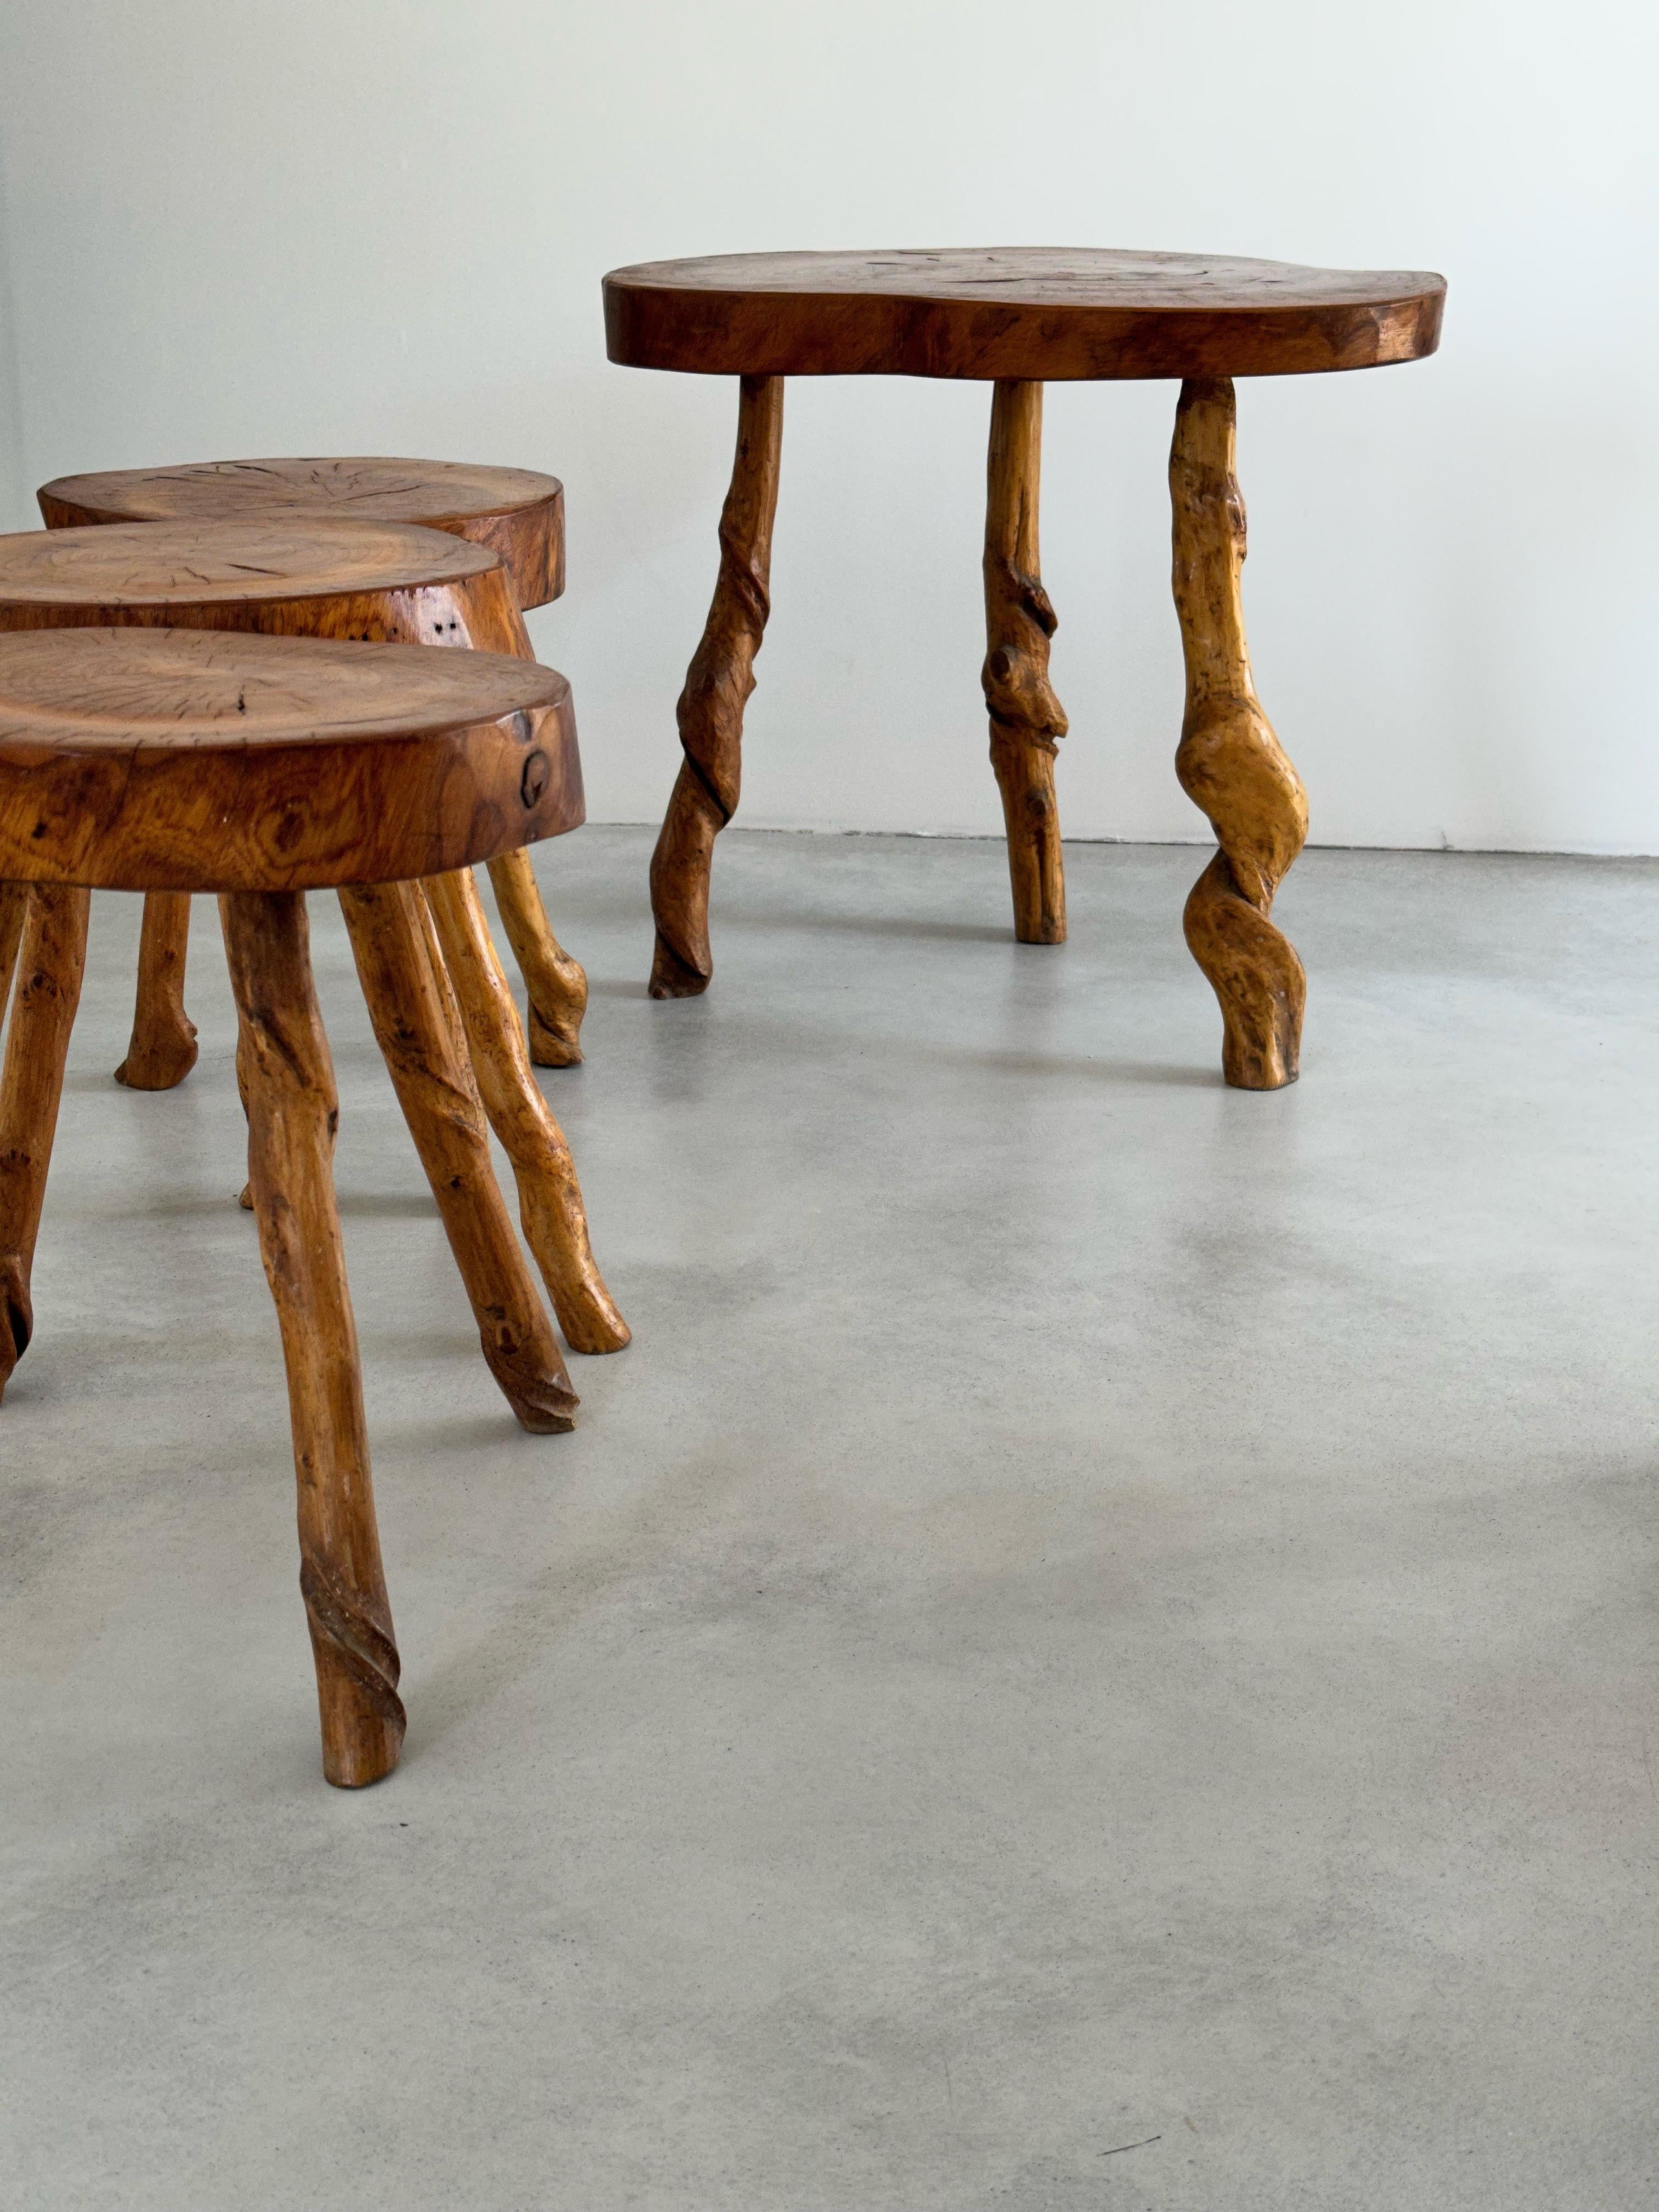 Folk Art Brutalist Set of 3 Low Stools and 1 Coffee Table, Solid Wood, France, 1960s For Sale